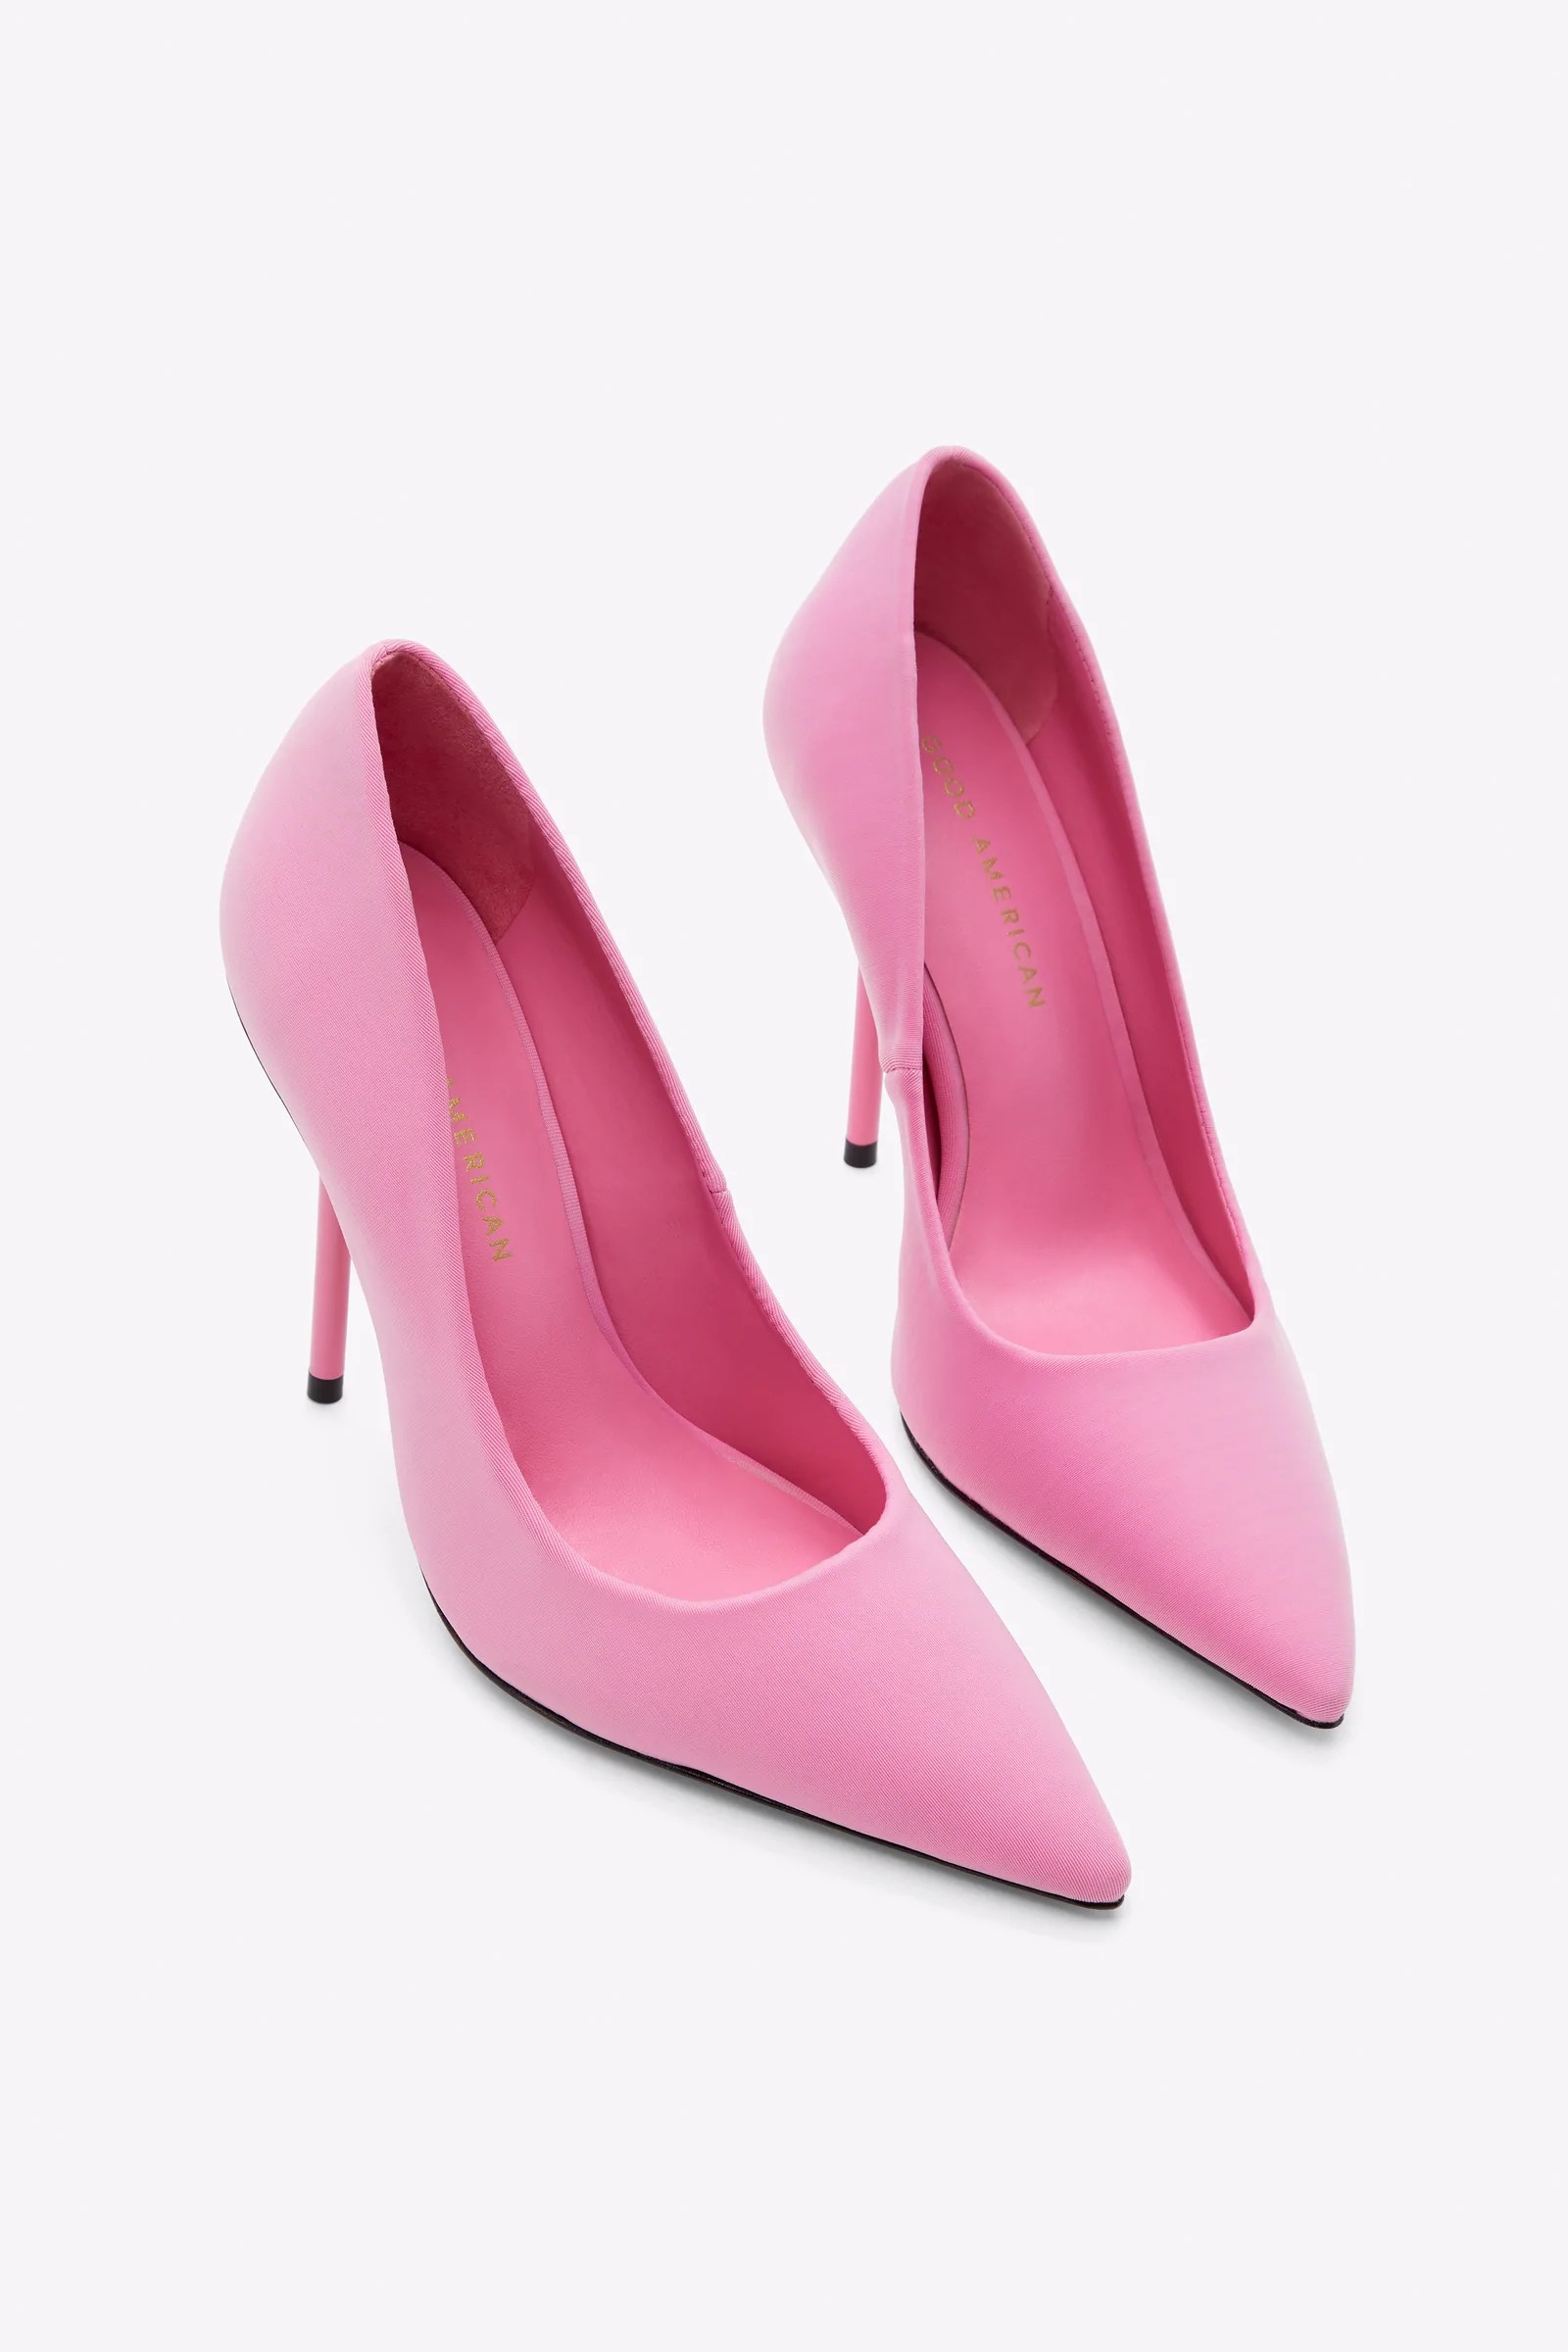 Should heels be tight or loose? - Quora